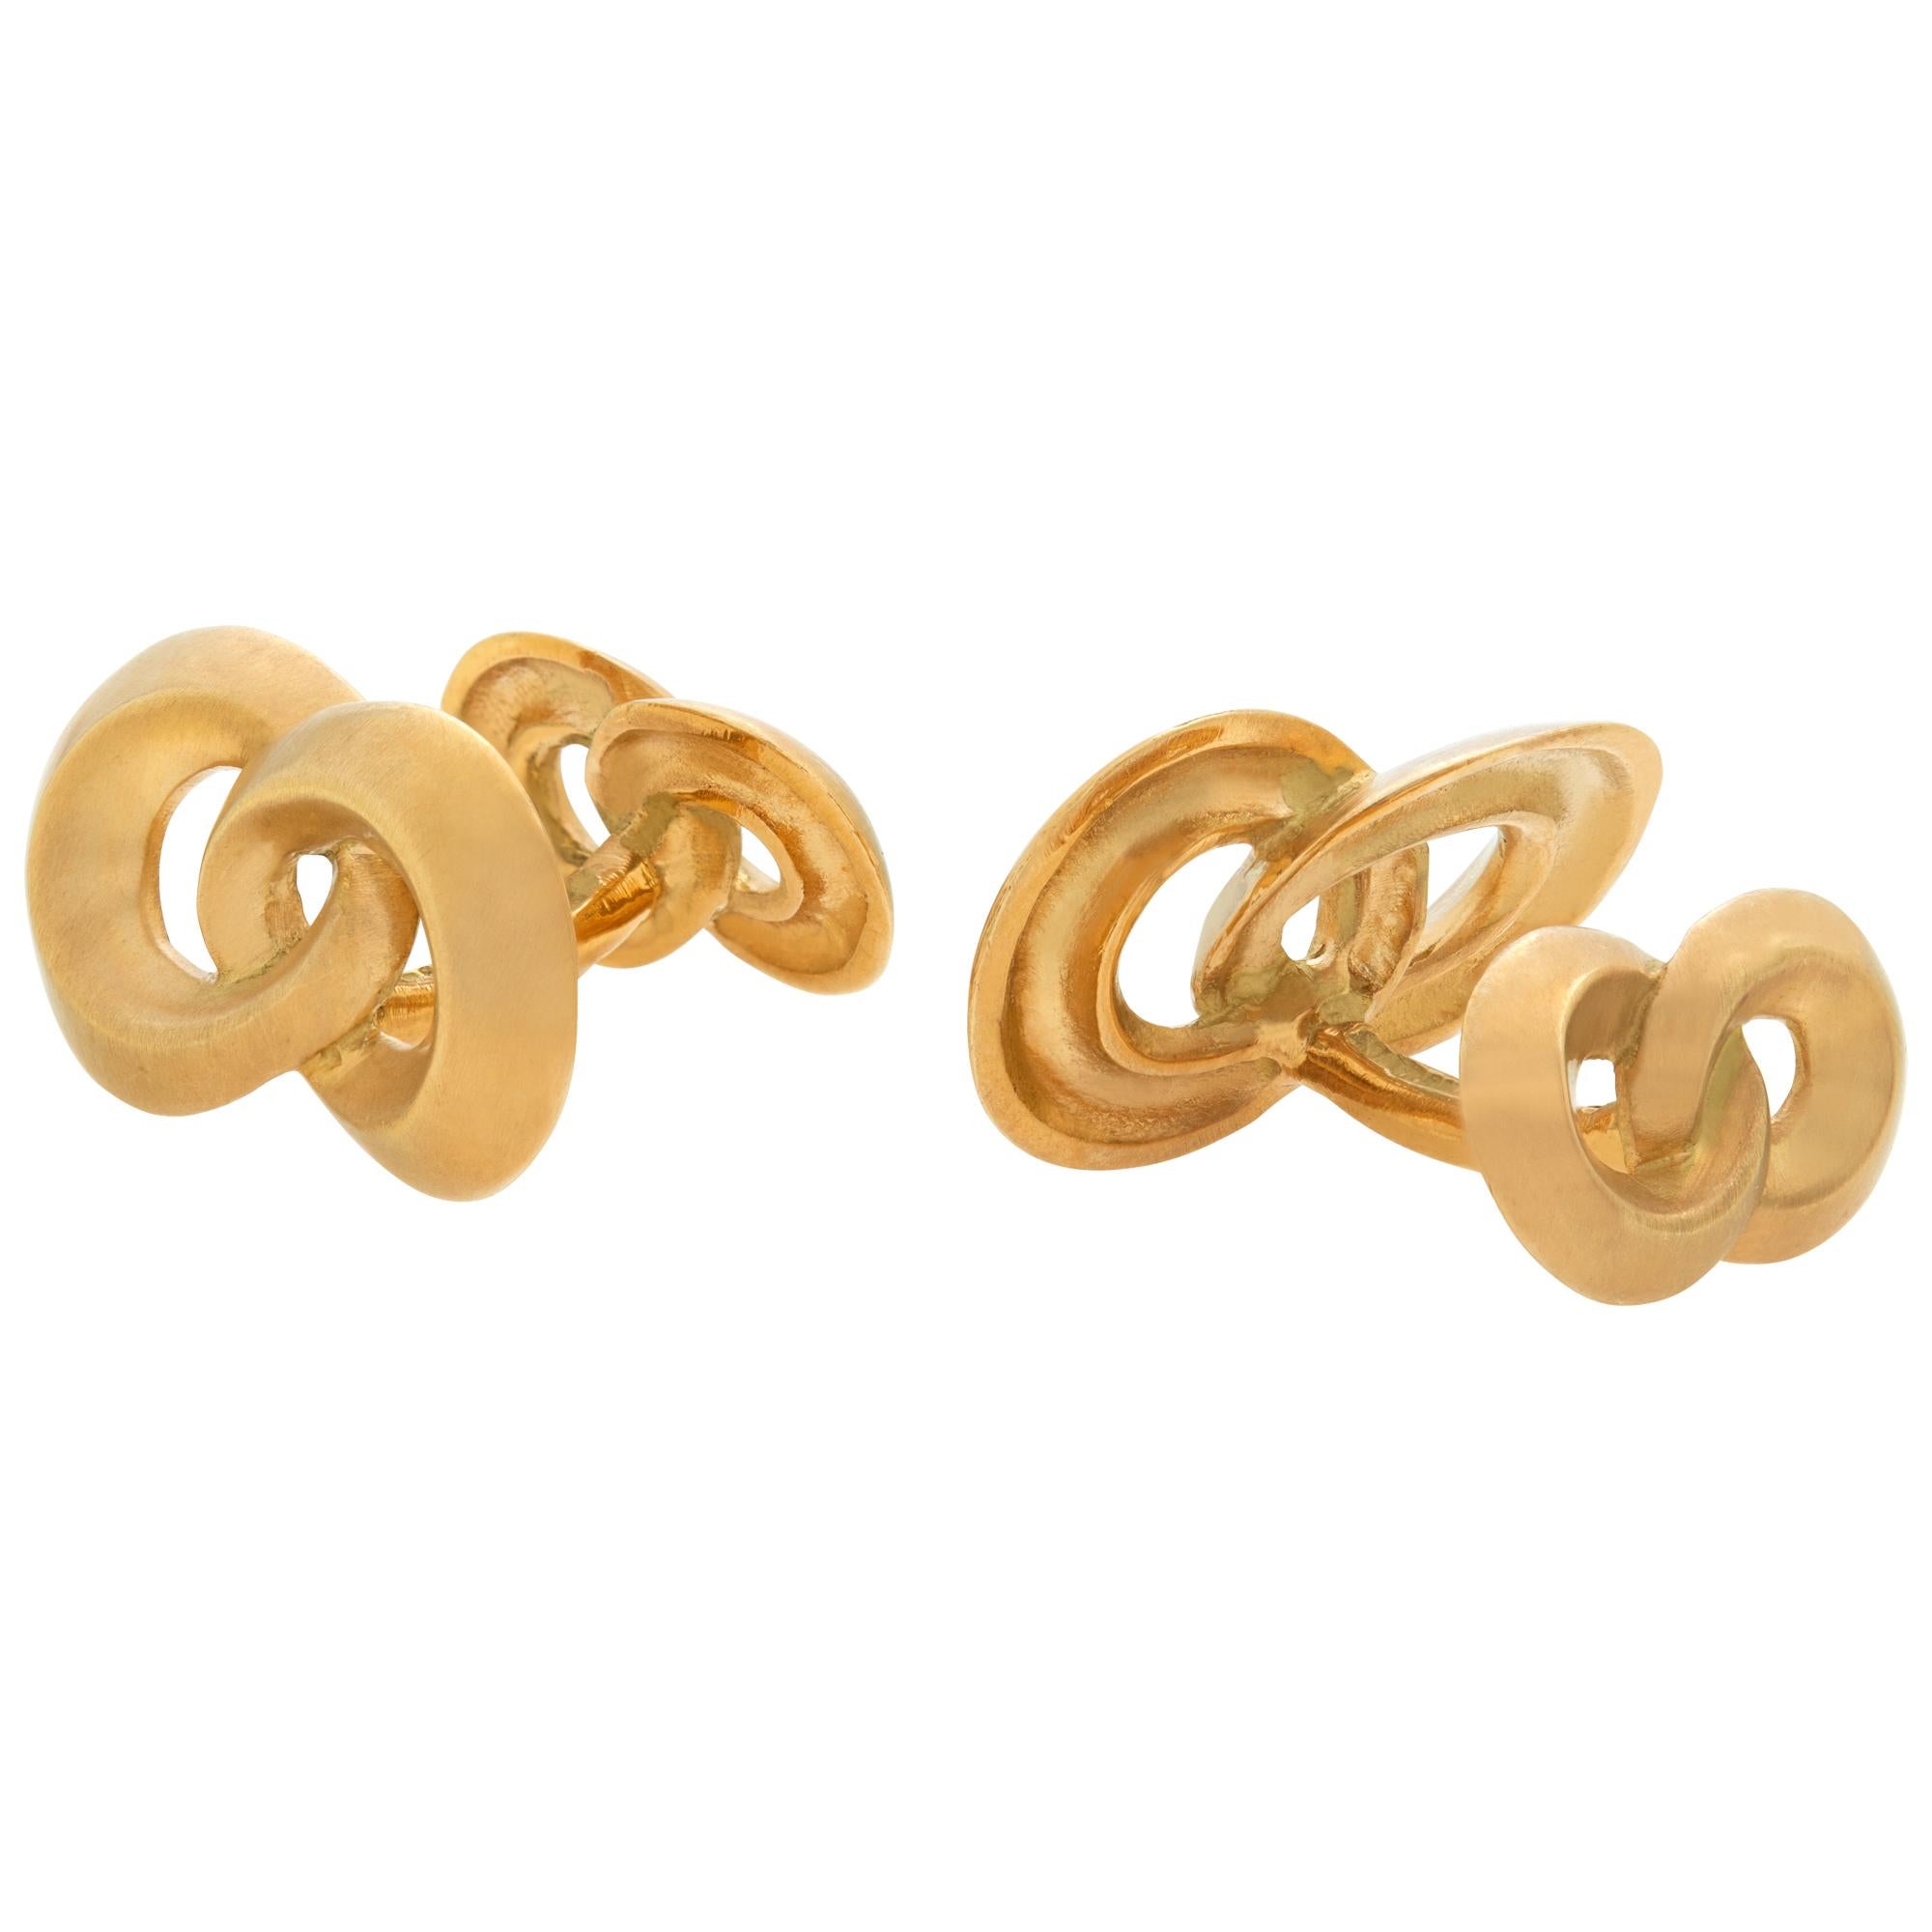 Collectible, Angela Cummings 1988, Double Knots 18k Yellow Gold Cufflinks In Excellent Condition For Sale In Surfside, FL